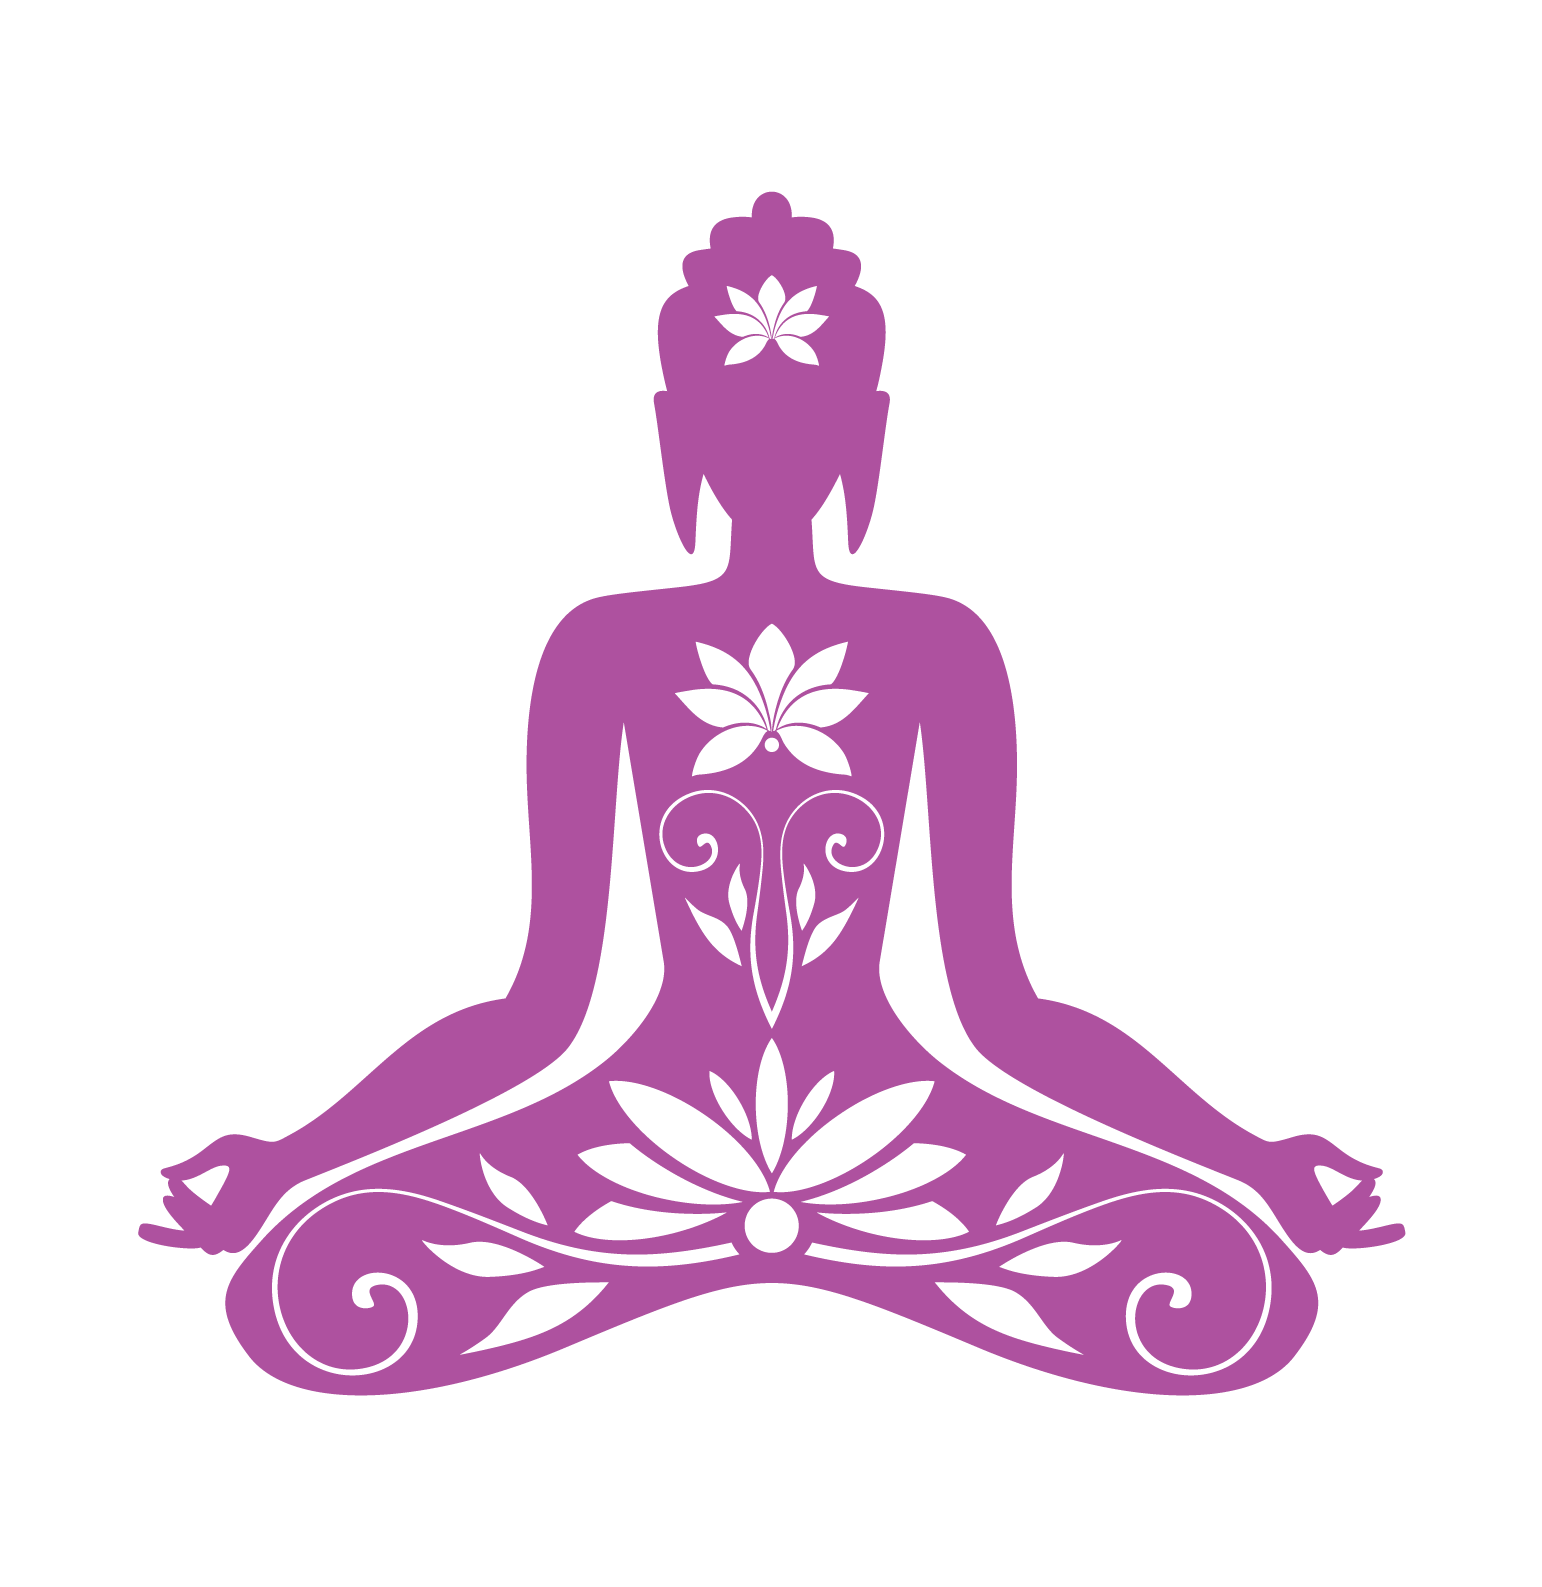 Meditation clipart emotionally healthy person. Cemepo